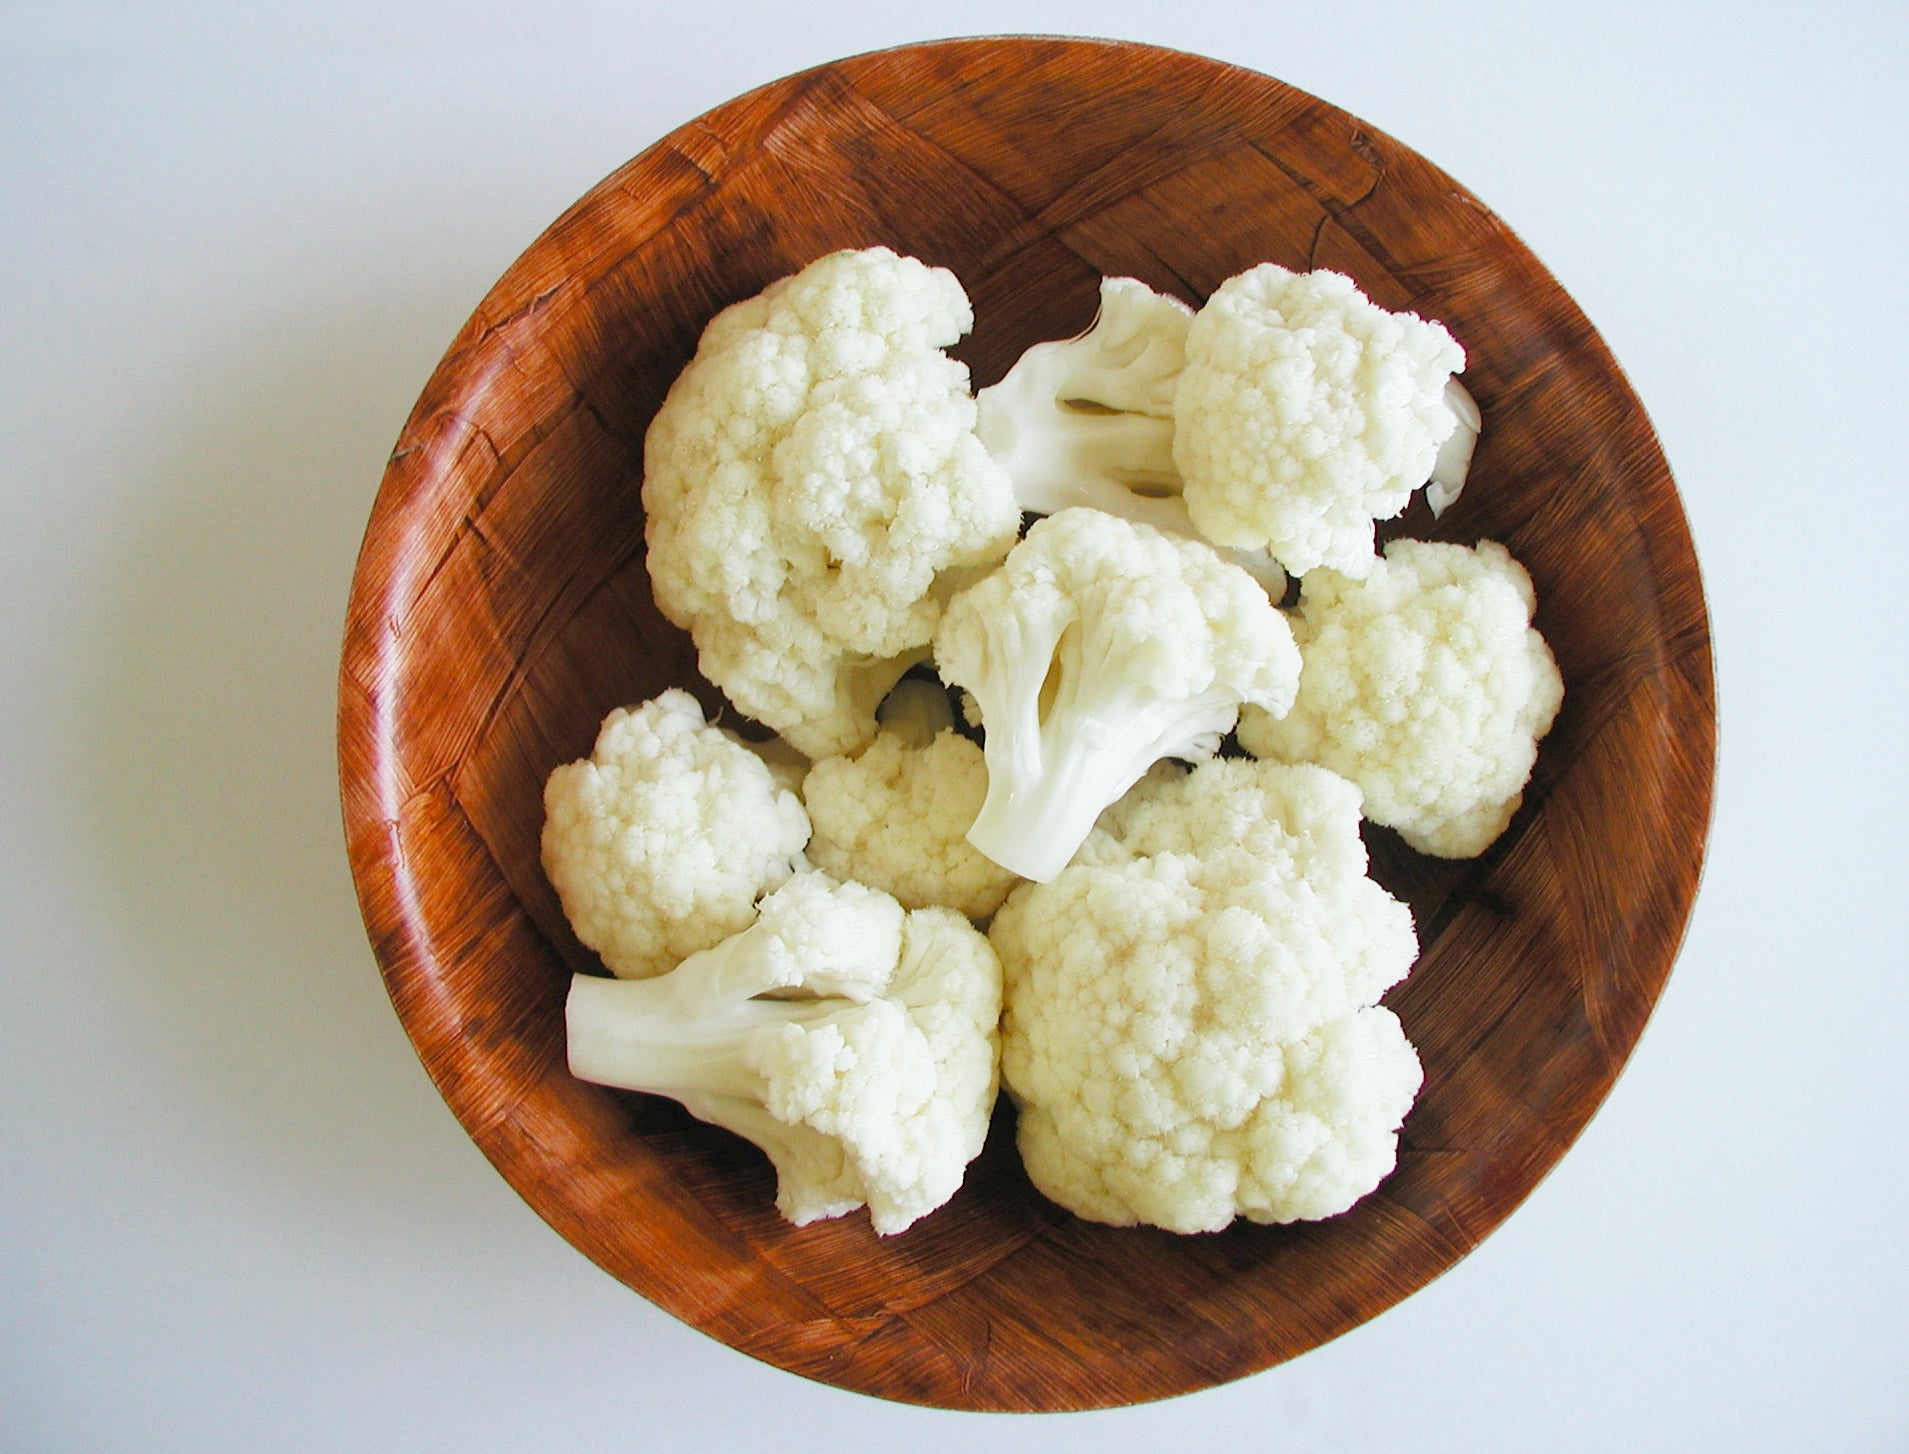 A wooden bowl of cauliflower for guinea pigs to eat